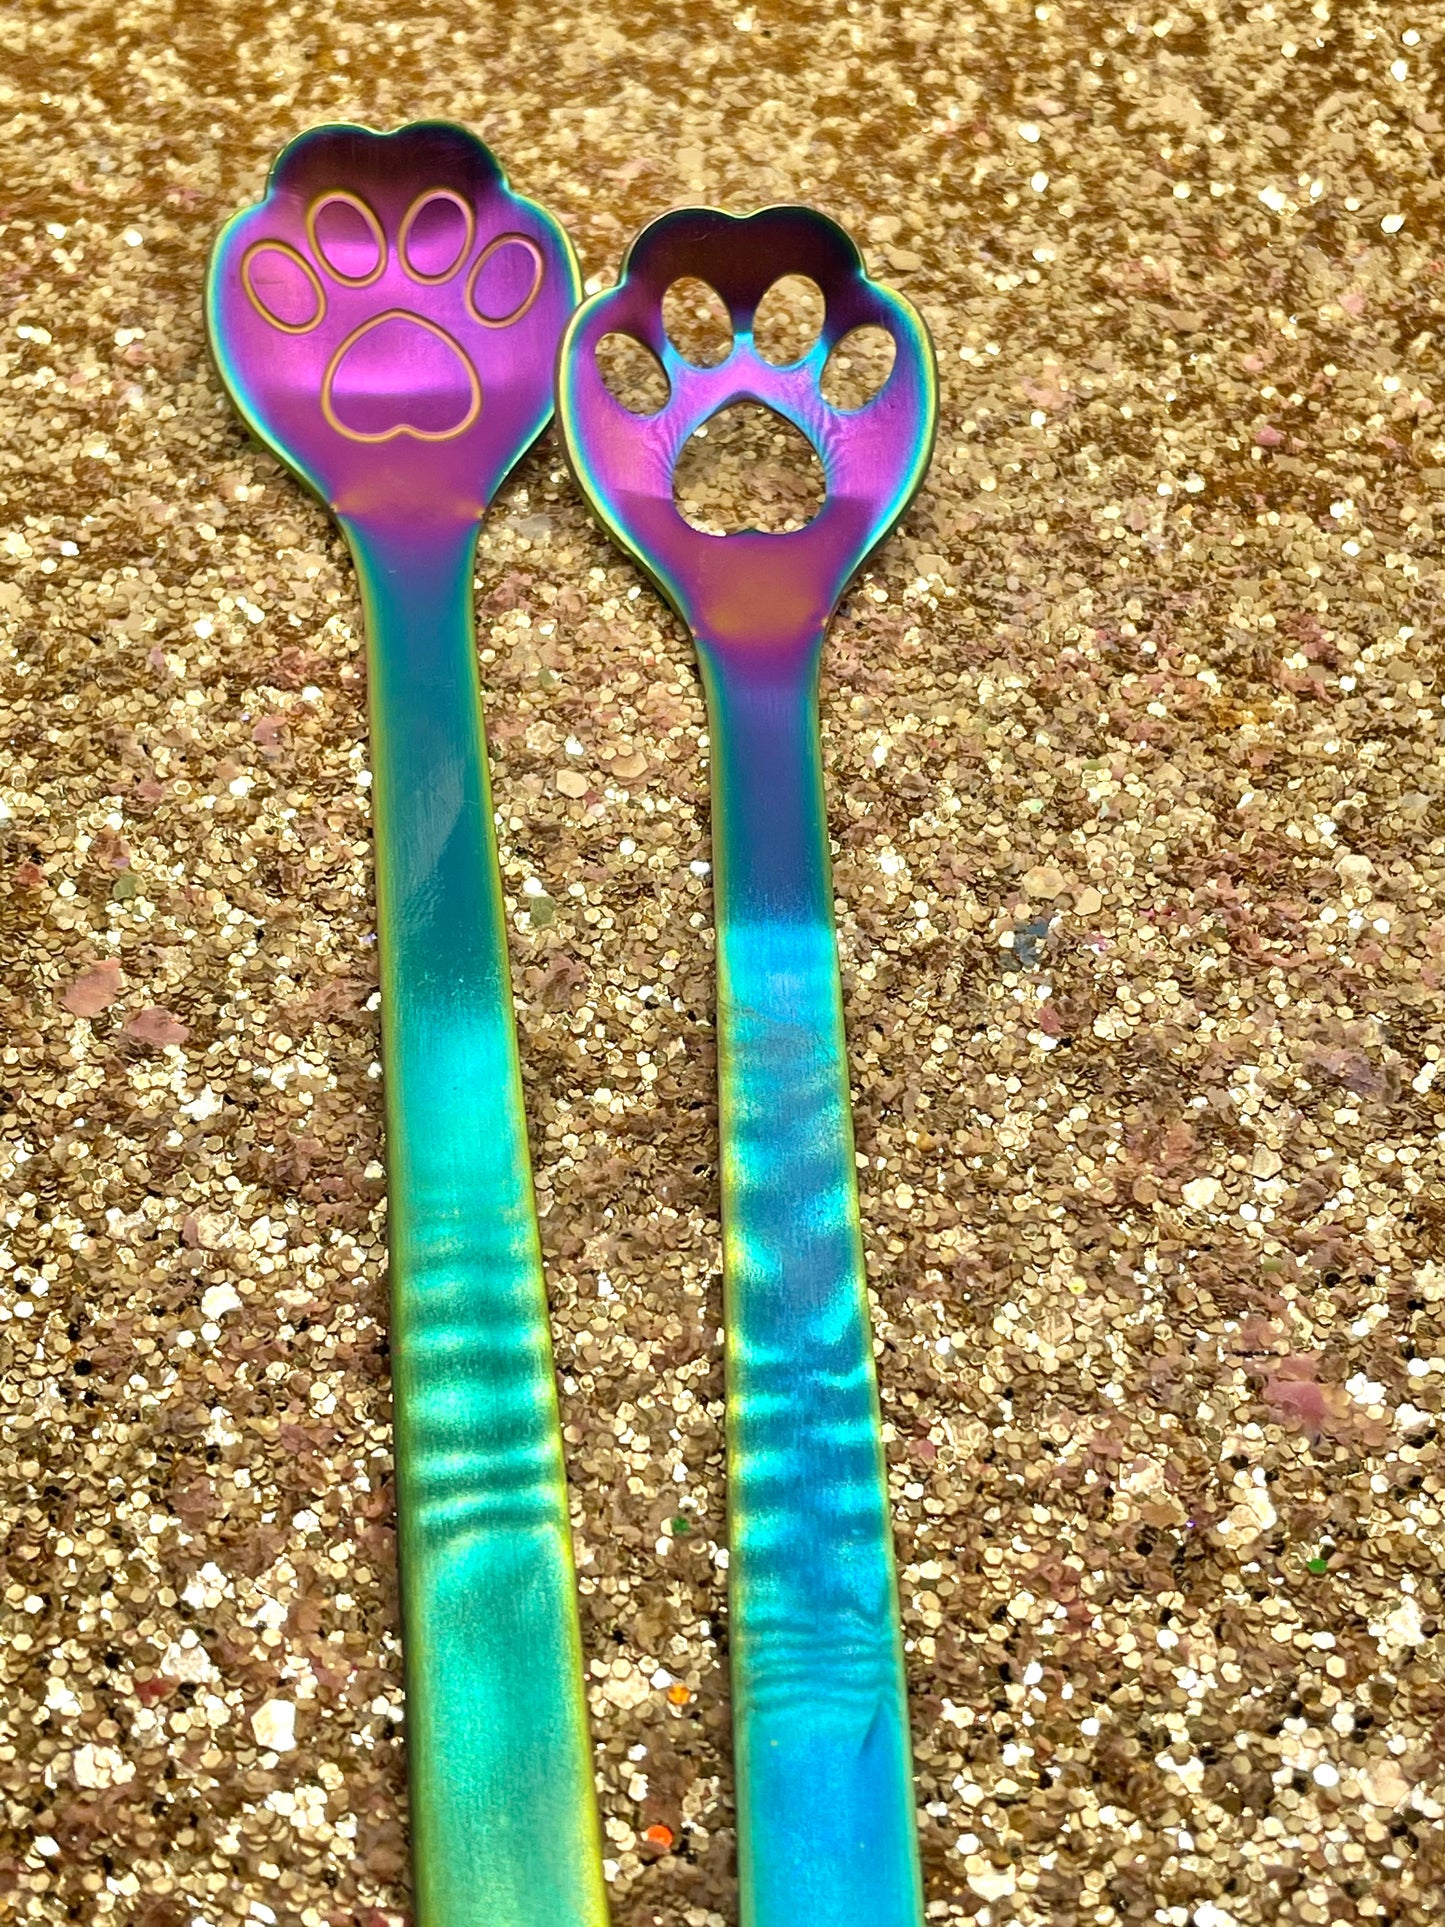 Cat Paw Scoopable Wax Spoon